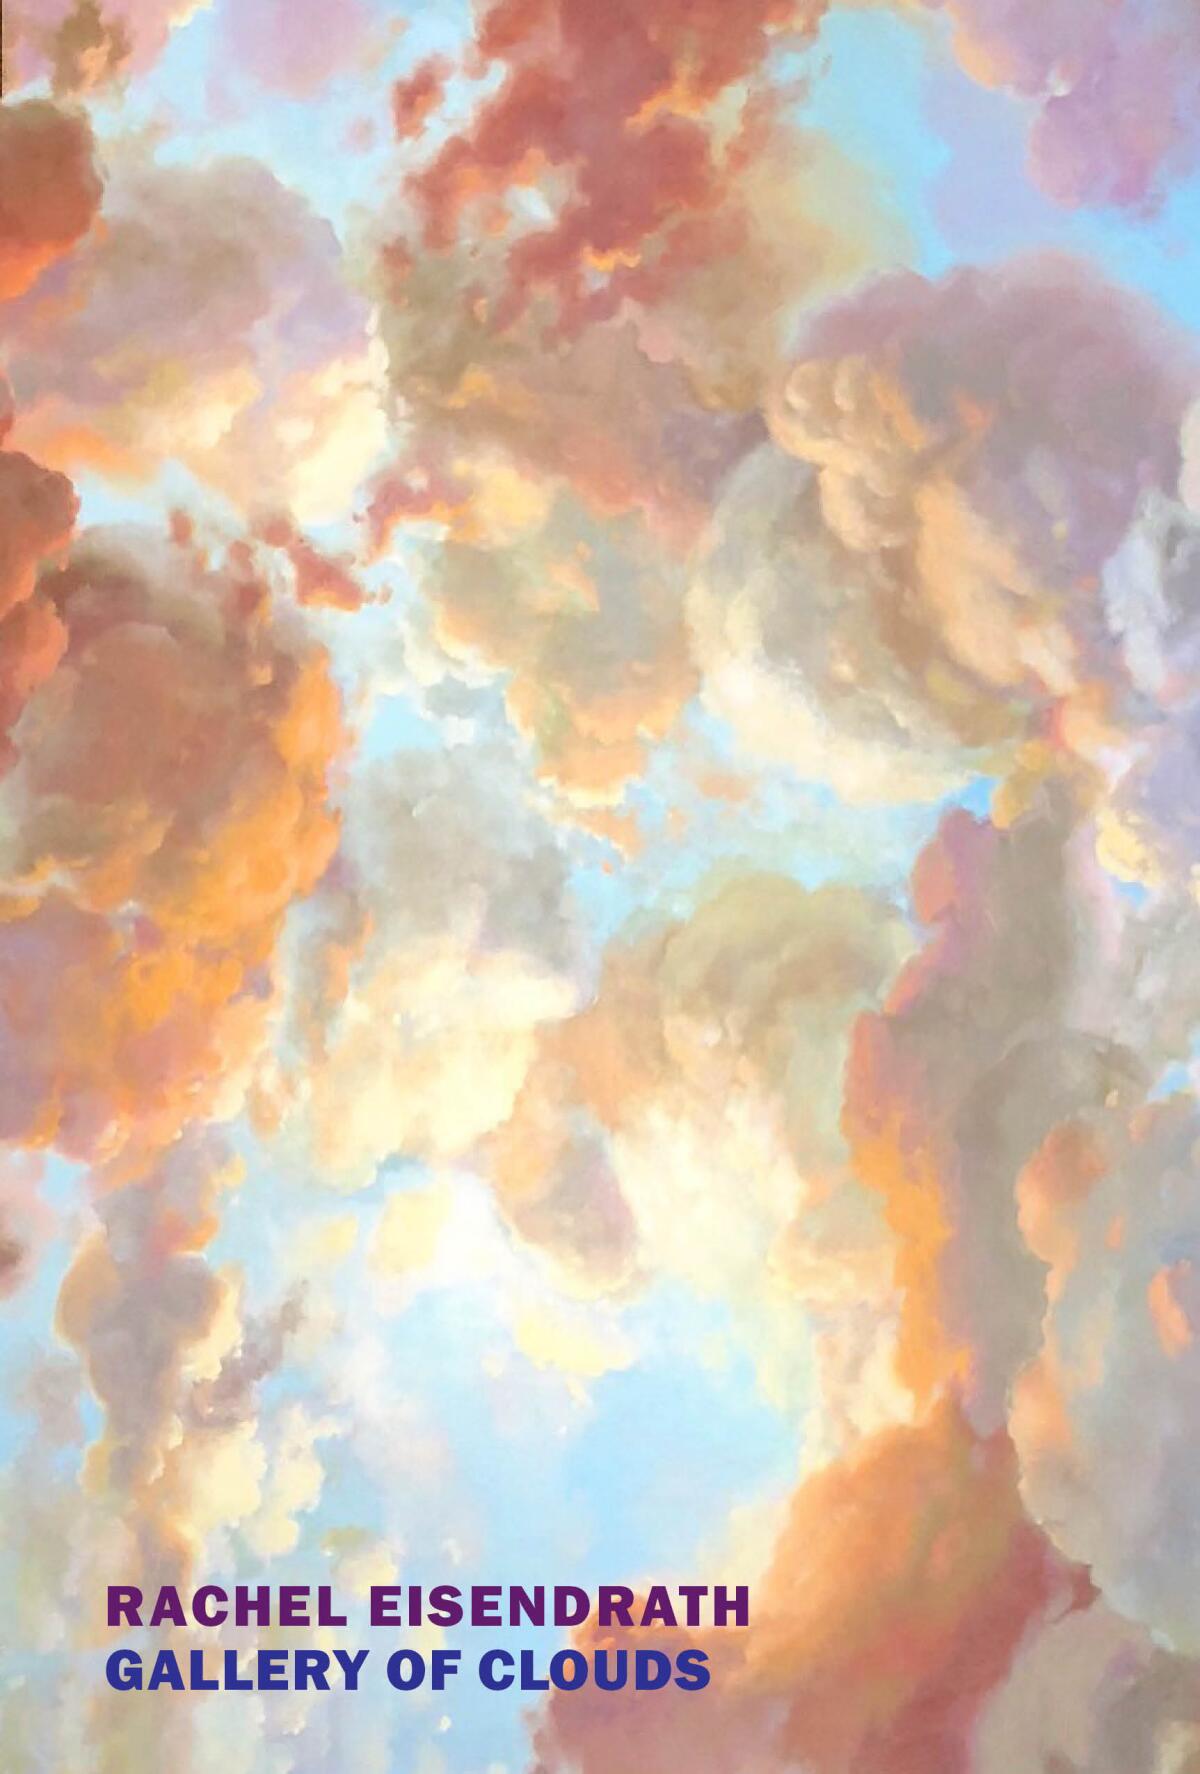 A book jacket for "Gallery of Clouds" by Rachel Eisendrath.